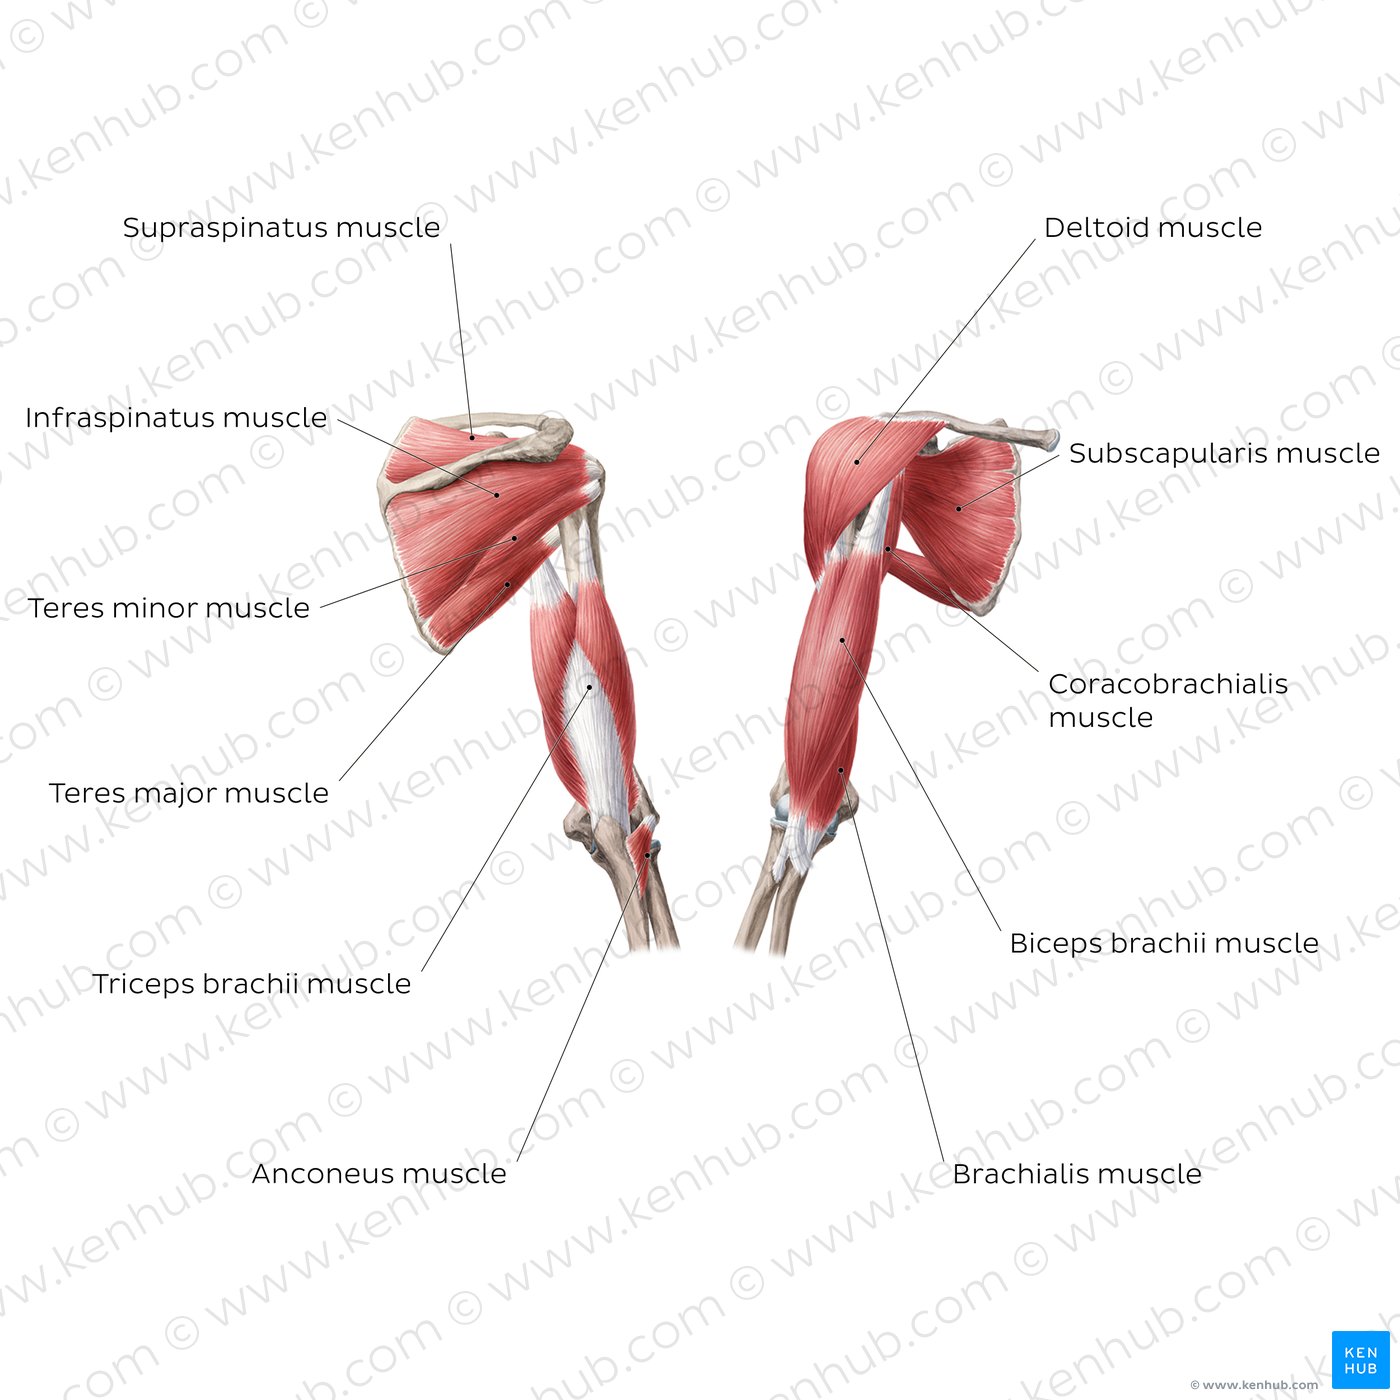 Muscles of the arm and shoulder